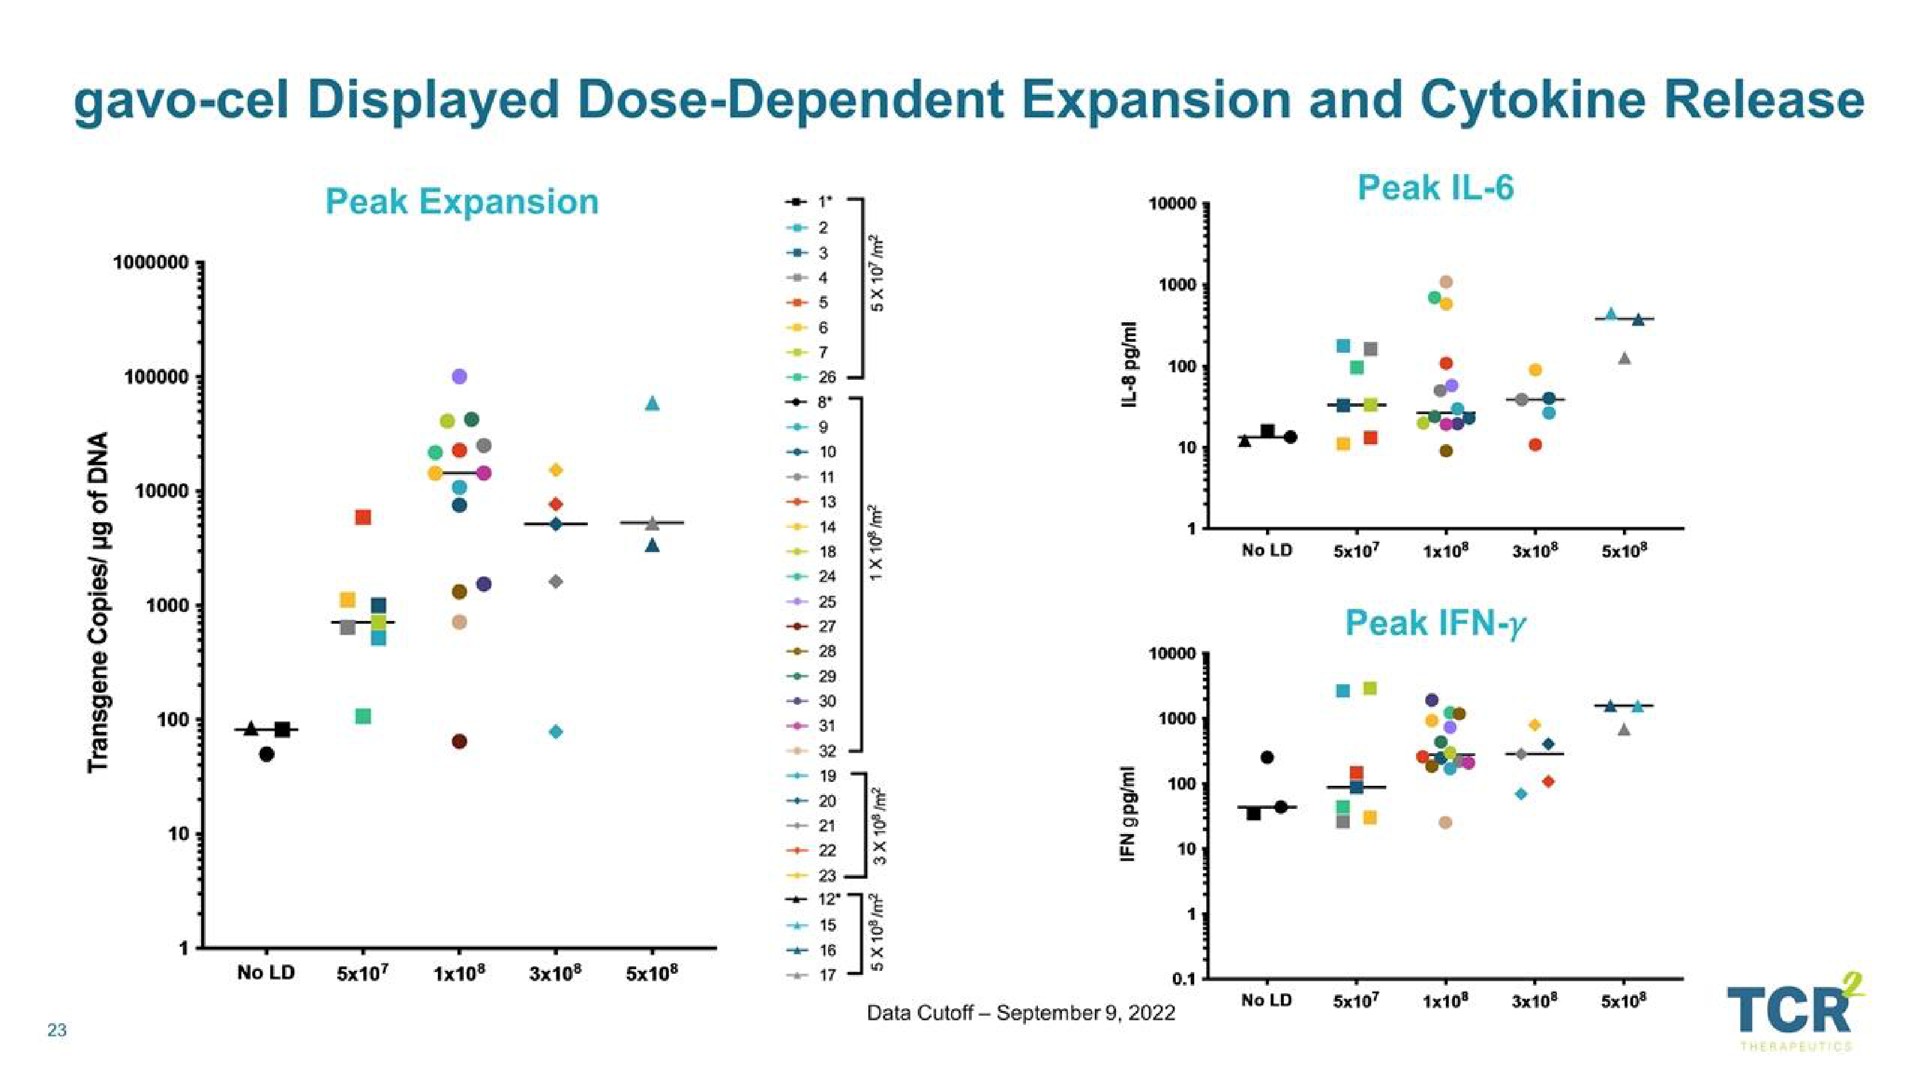 displayed dose dependent expansion and release | TCR2 Therapeutics